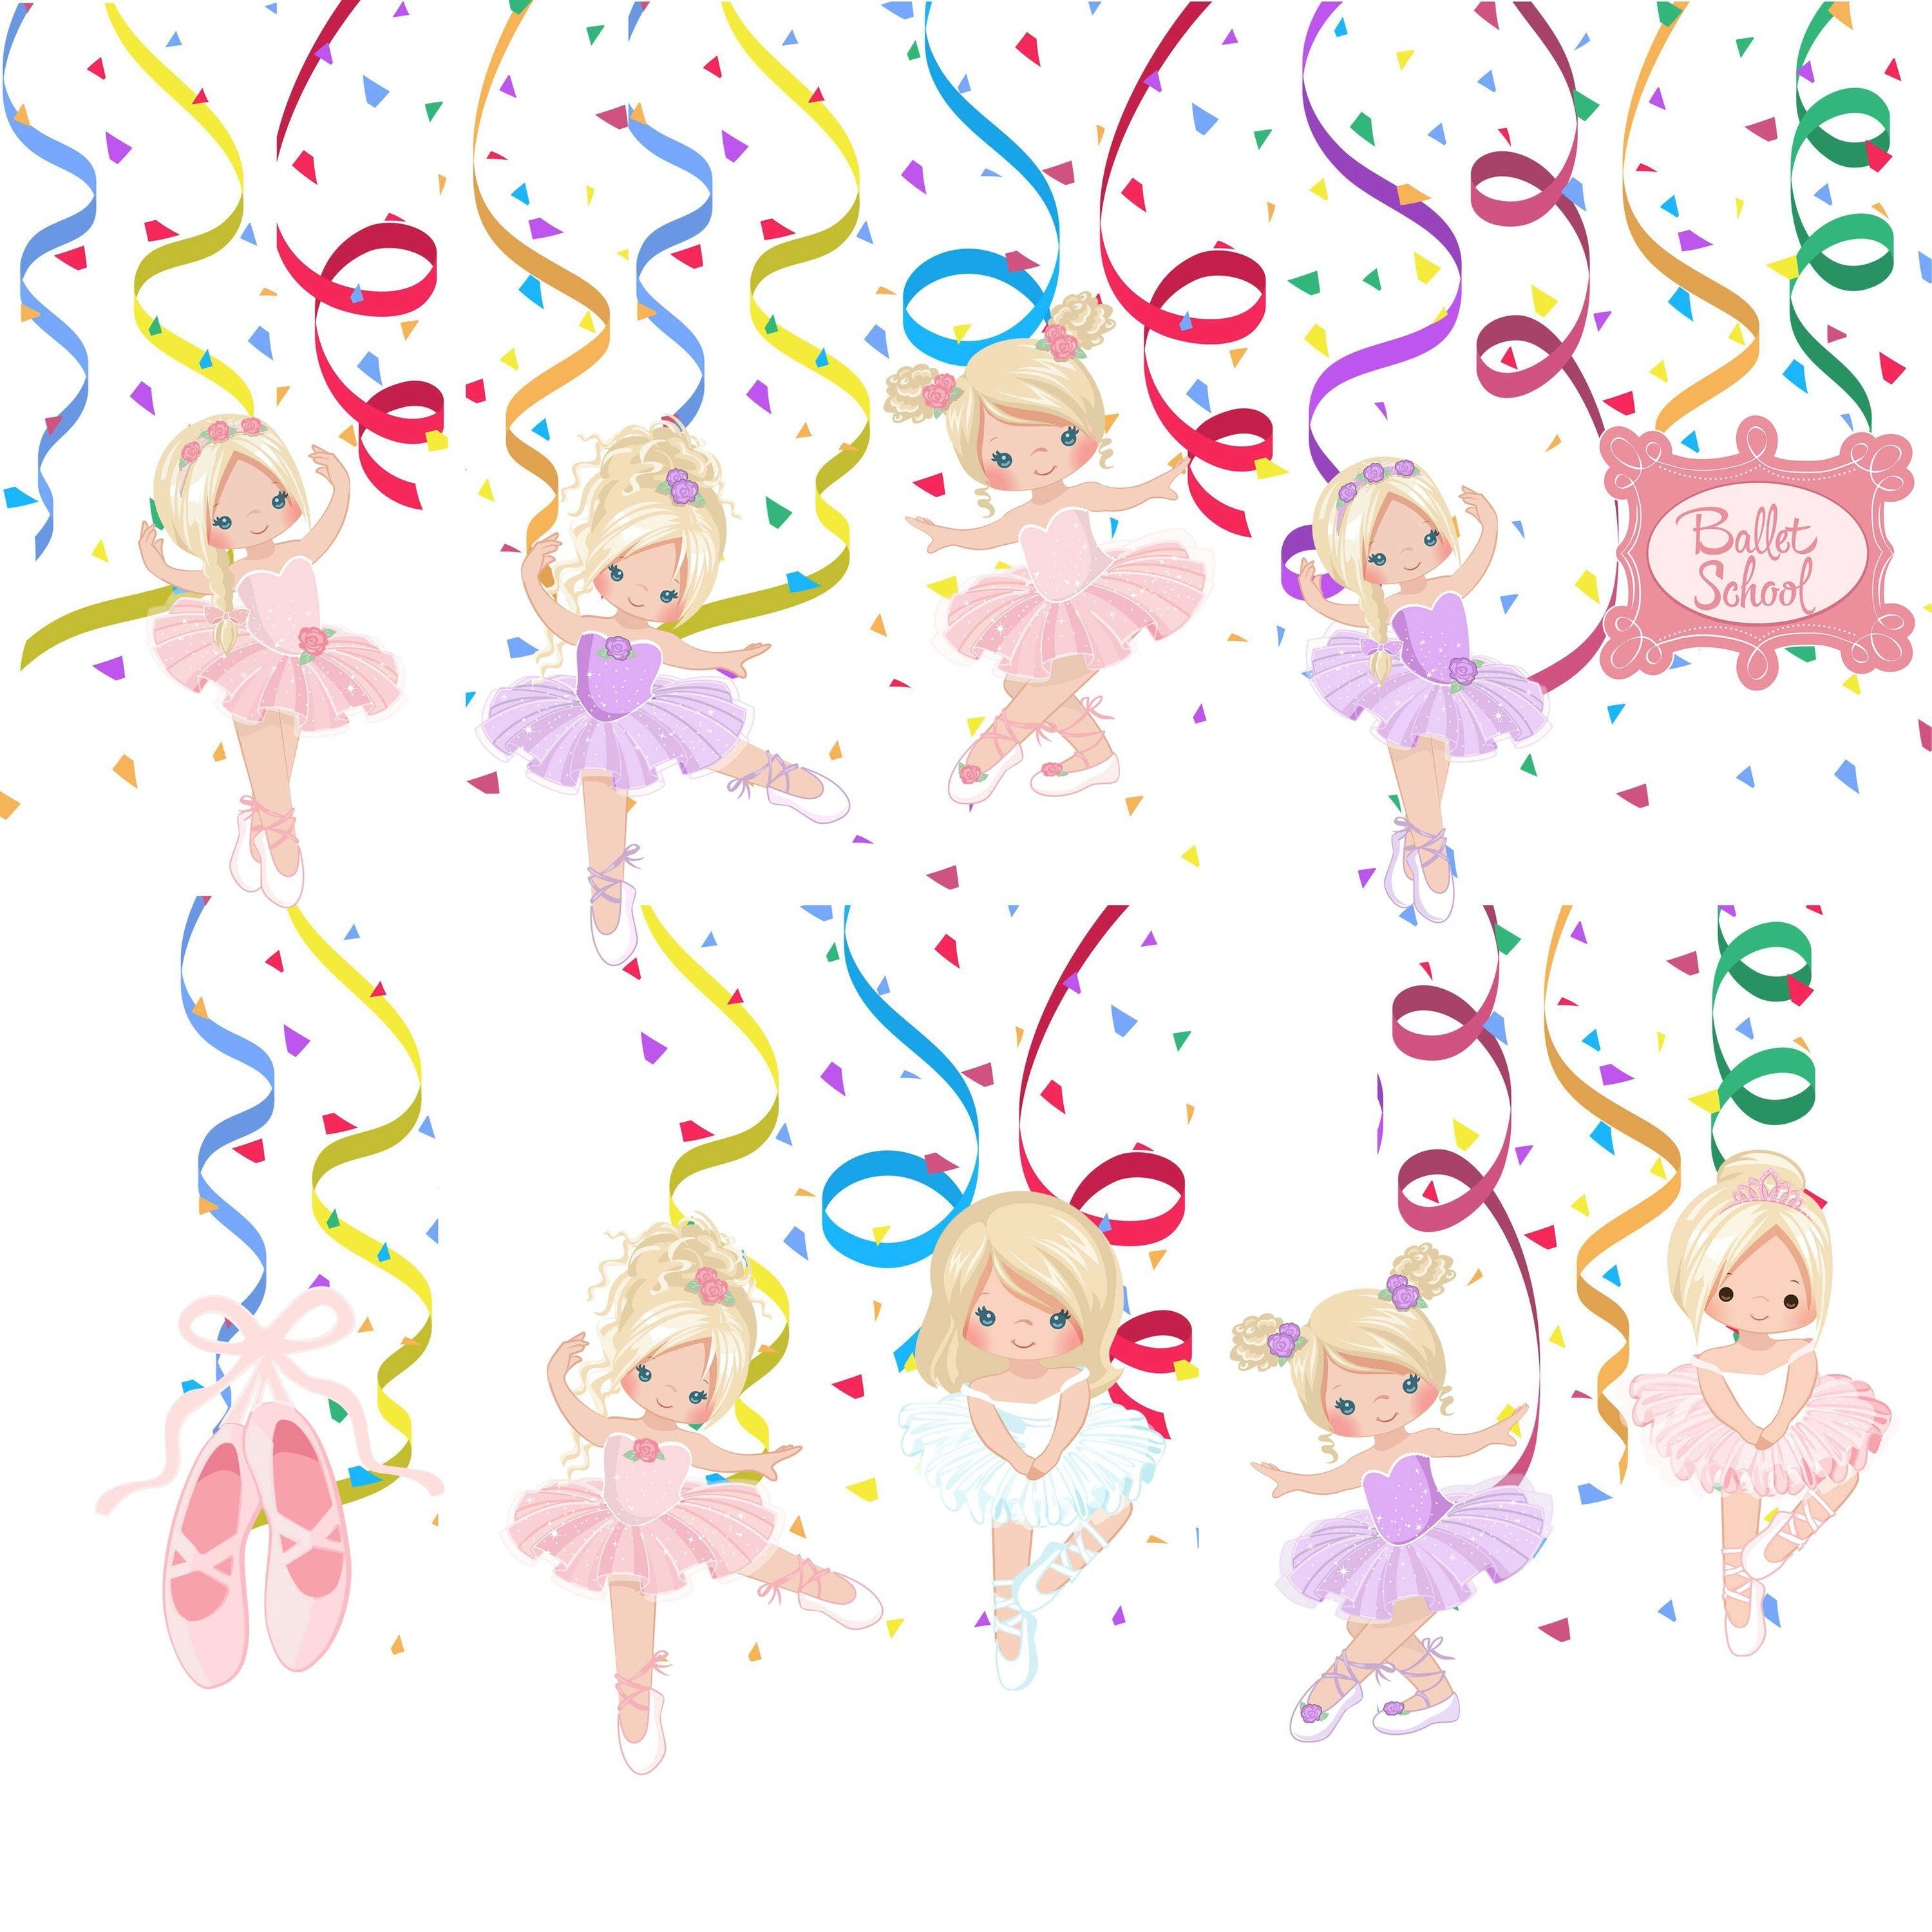 Enchanting Ballerina Swirl Decorations - Set of 10 Dance-Inspired Hanging Decor for Parties